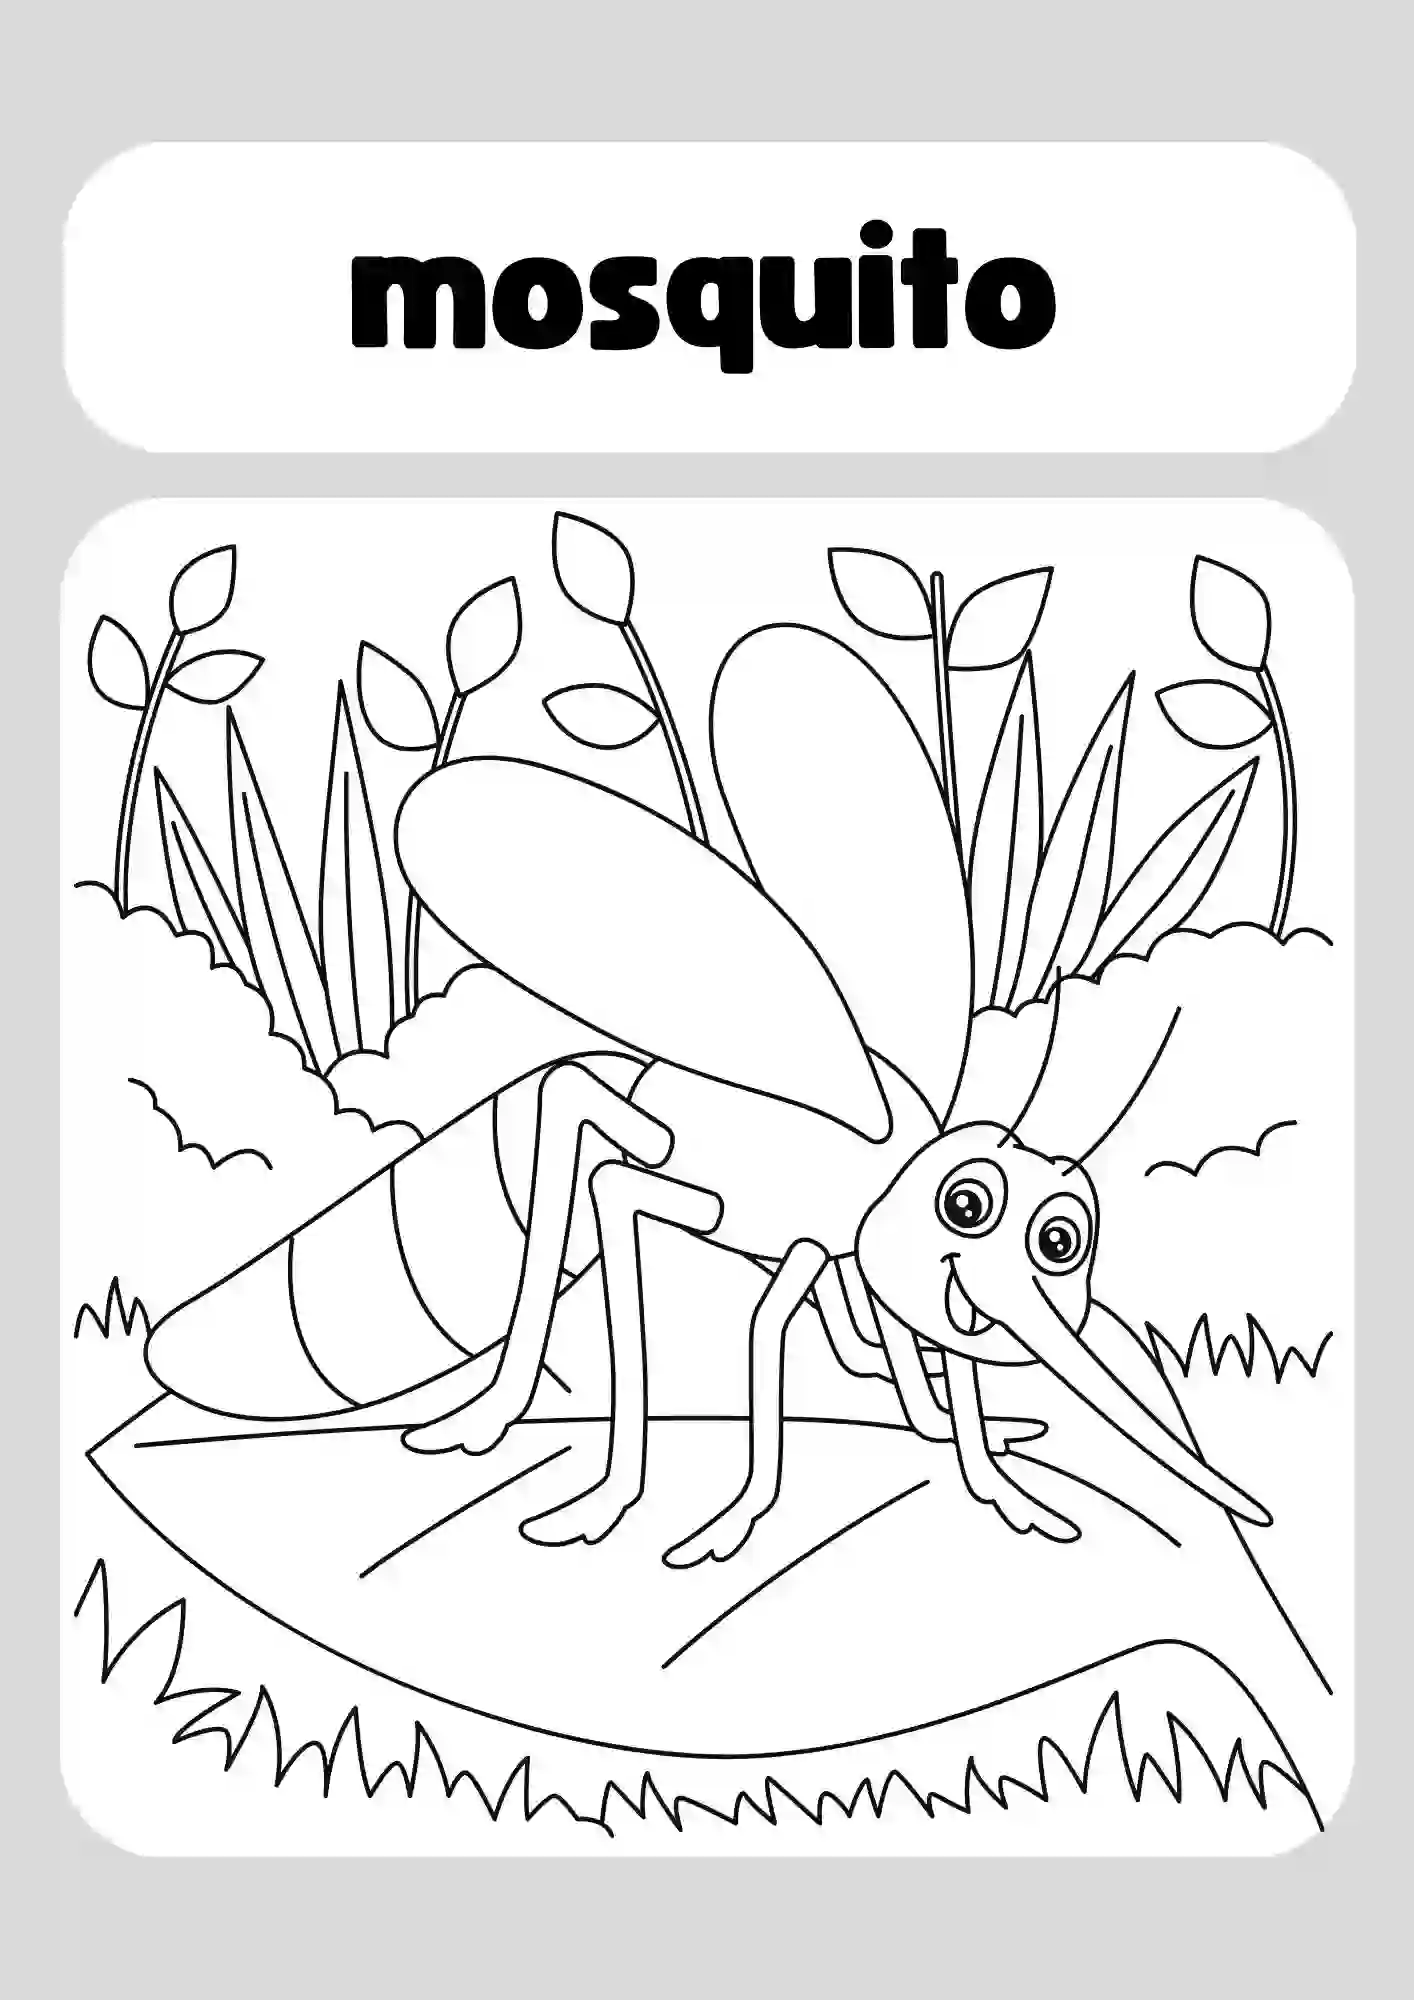 Insects Coloring Worksheets for Kindergarten (mosquito)